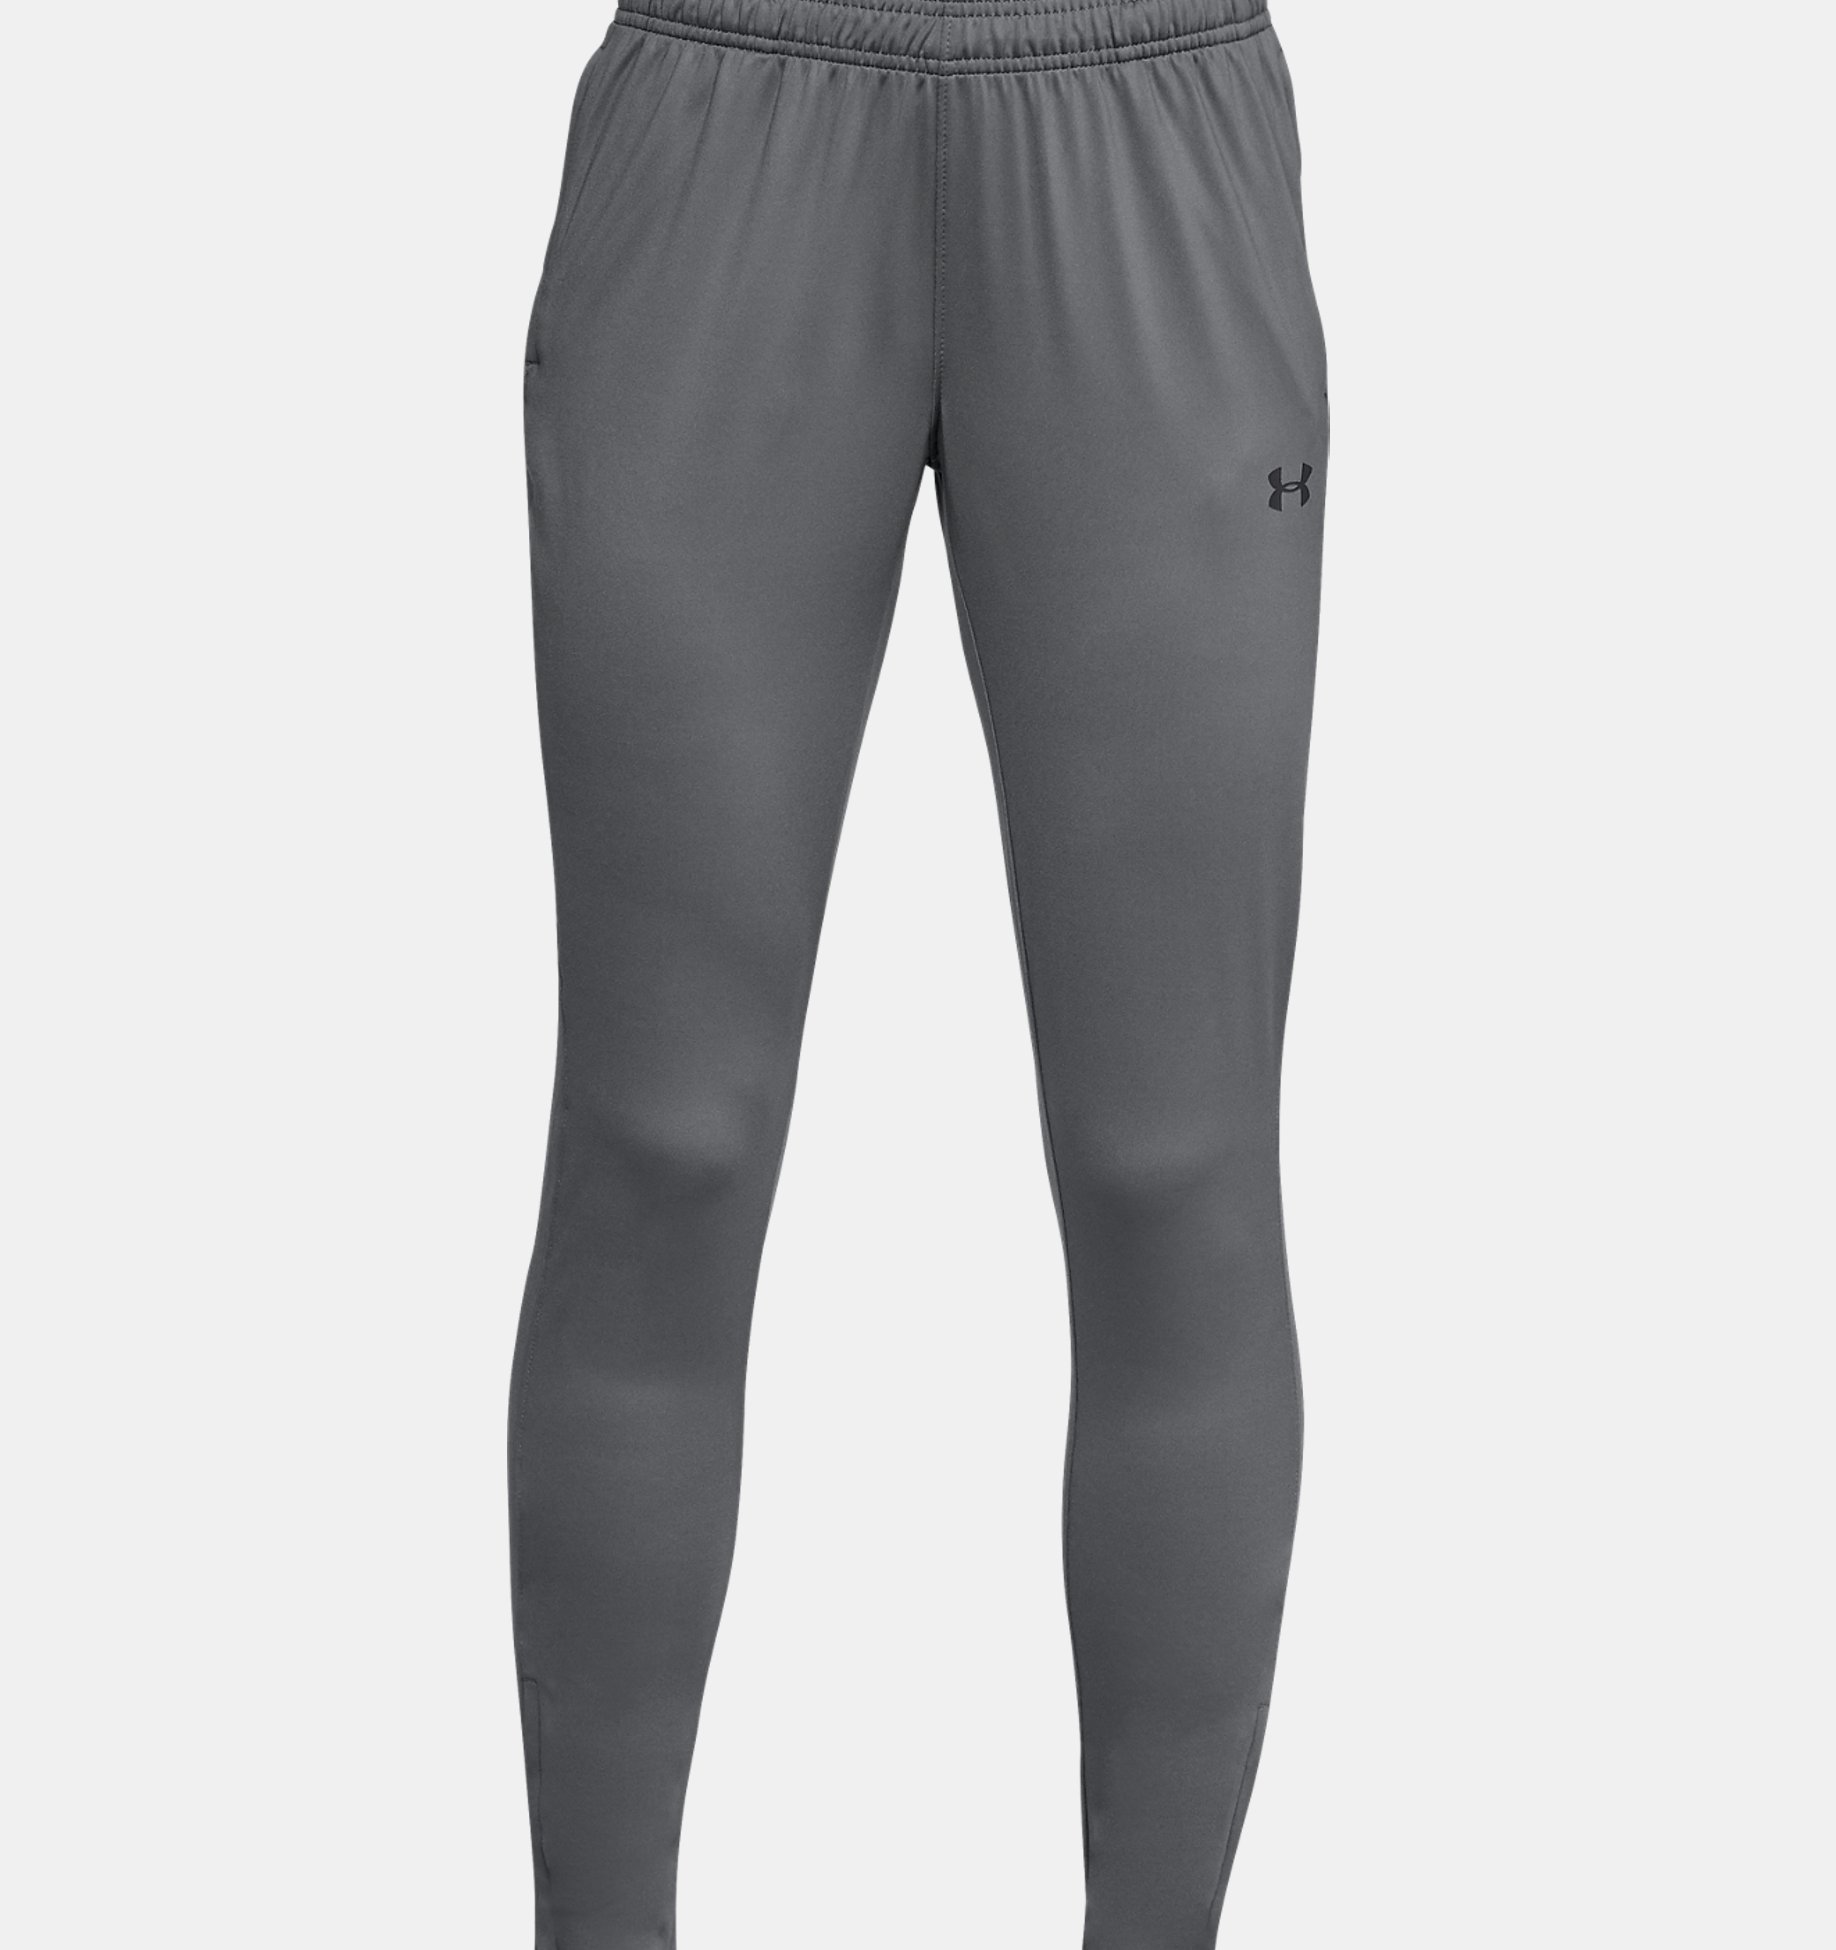 New Under Armour Women's UA Challenger II Training Pants Free Shipping 